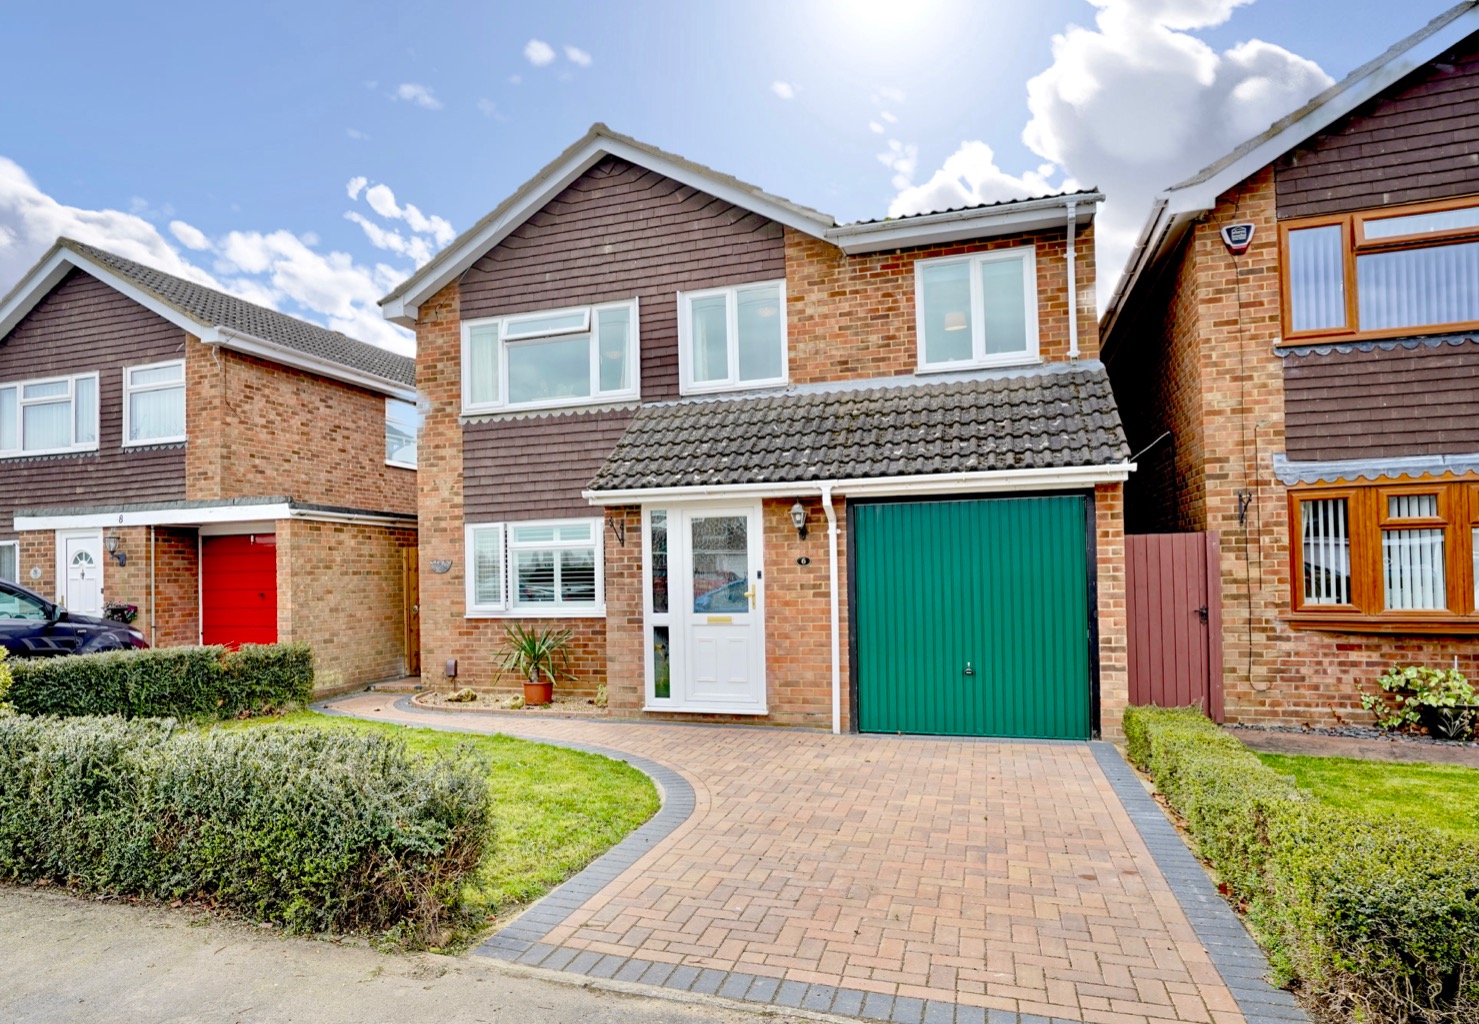 **Five bedroom detached home* Driveway and single garage* separate dining area* quiet cul-de-sac* popular Eaton Ford location* ideal family home* contact us to arrange your viewing**